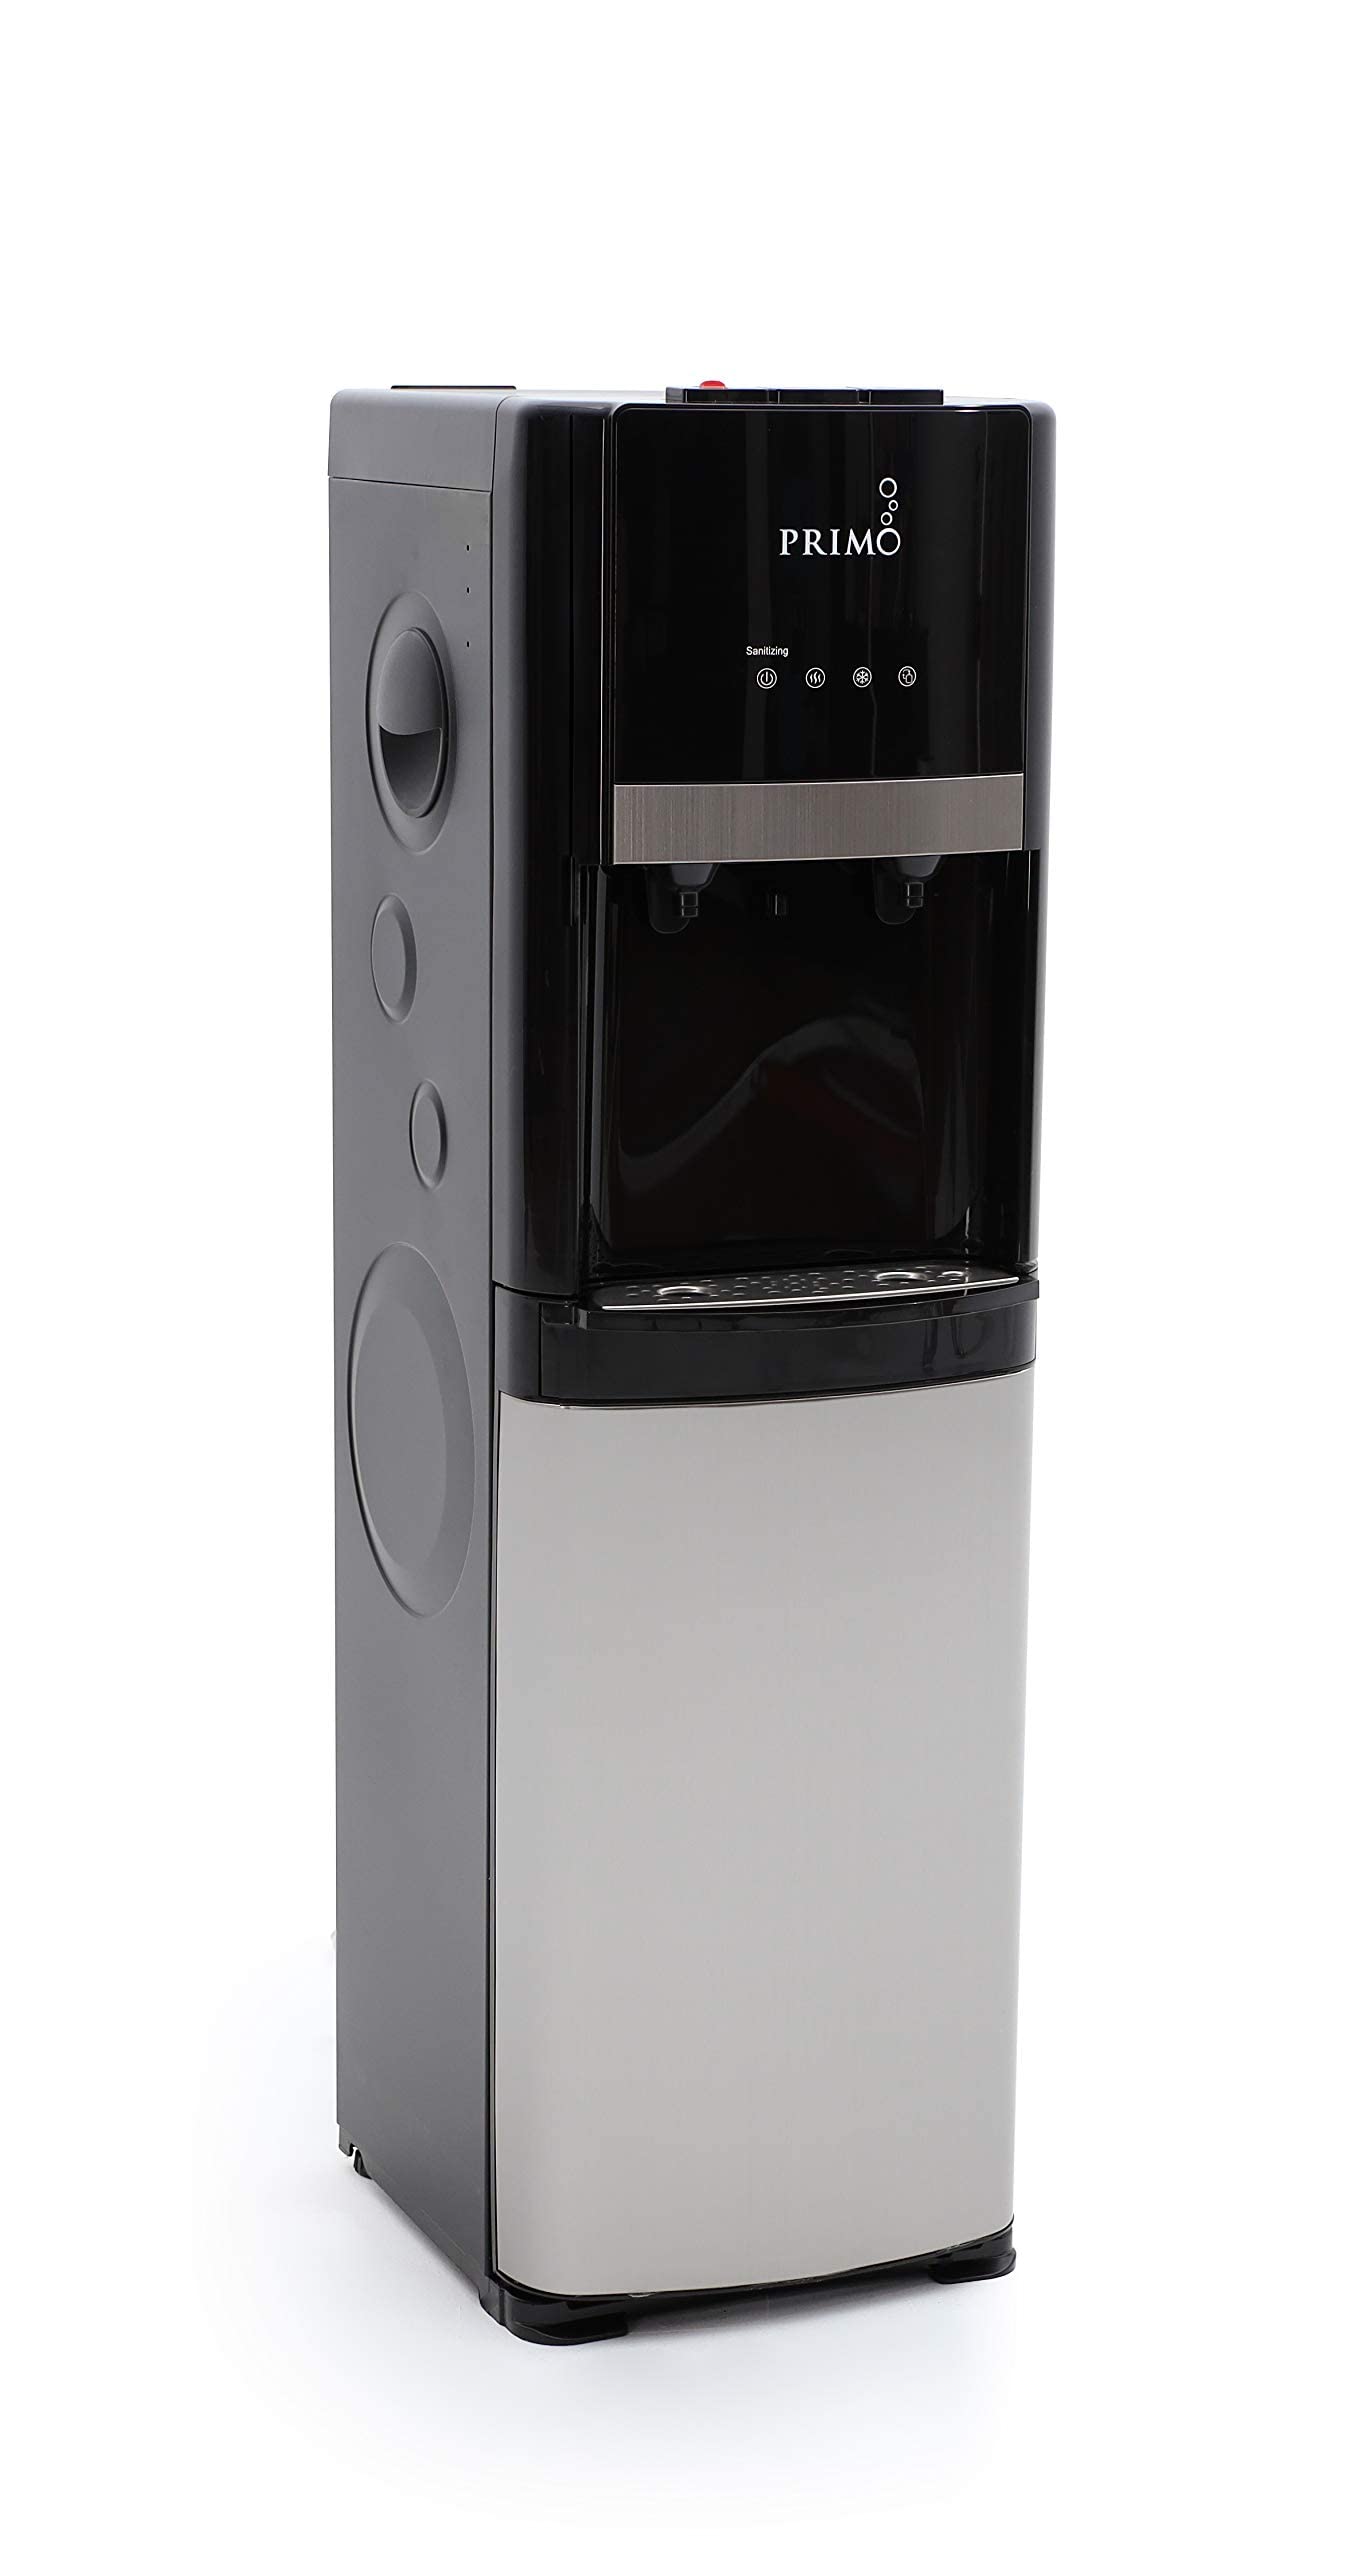 Primo Bottom-Loading Self-Sanitizing Water Dispenser - 2 Temp (Hot-Cold) Water Cooler Water Dispenser for 5 Gallon Bottle w/Child Safety Lock, Black and Stainless Steel